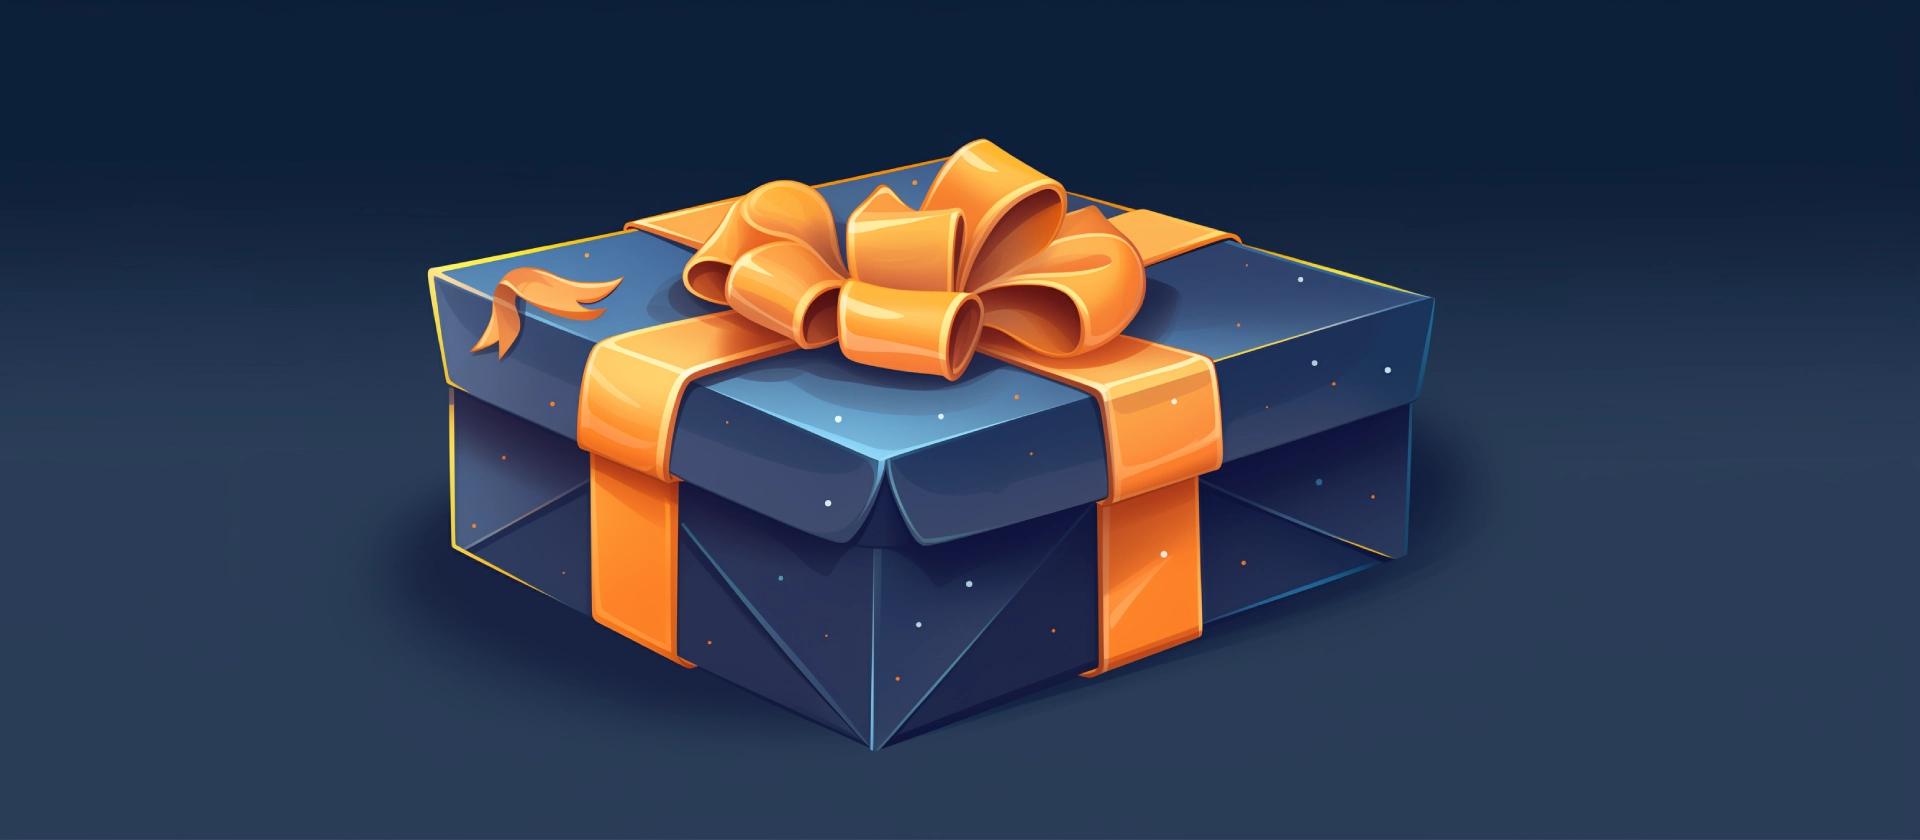 A wrapped gift in the colors of blue and orange